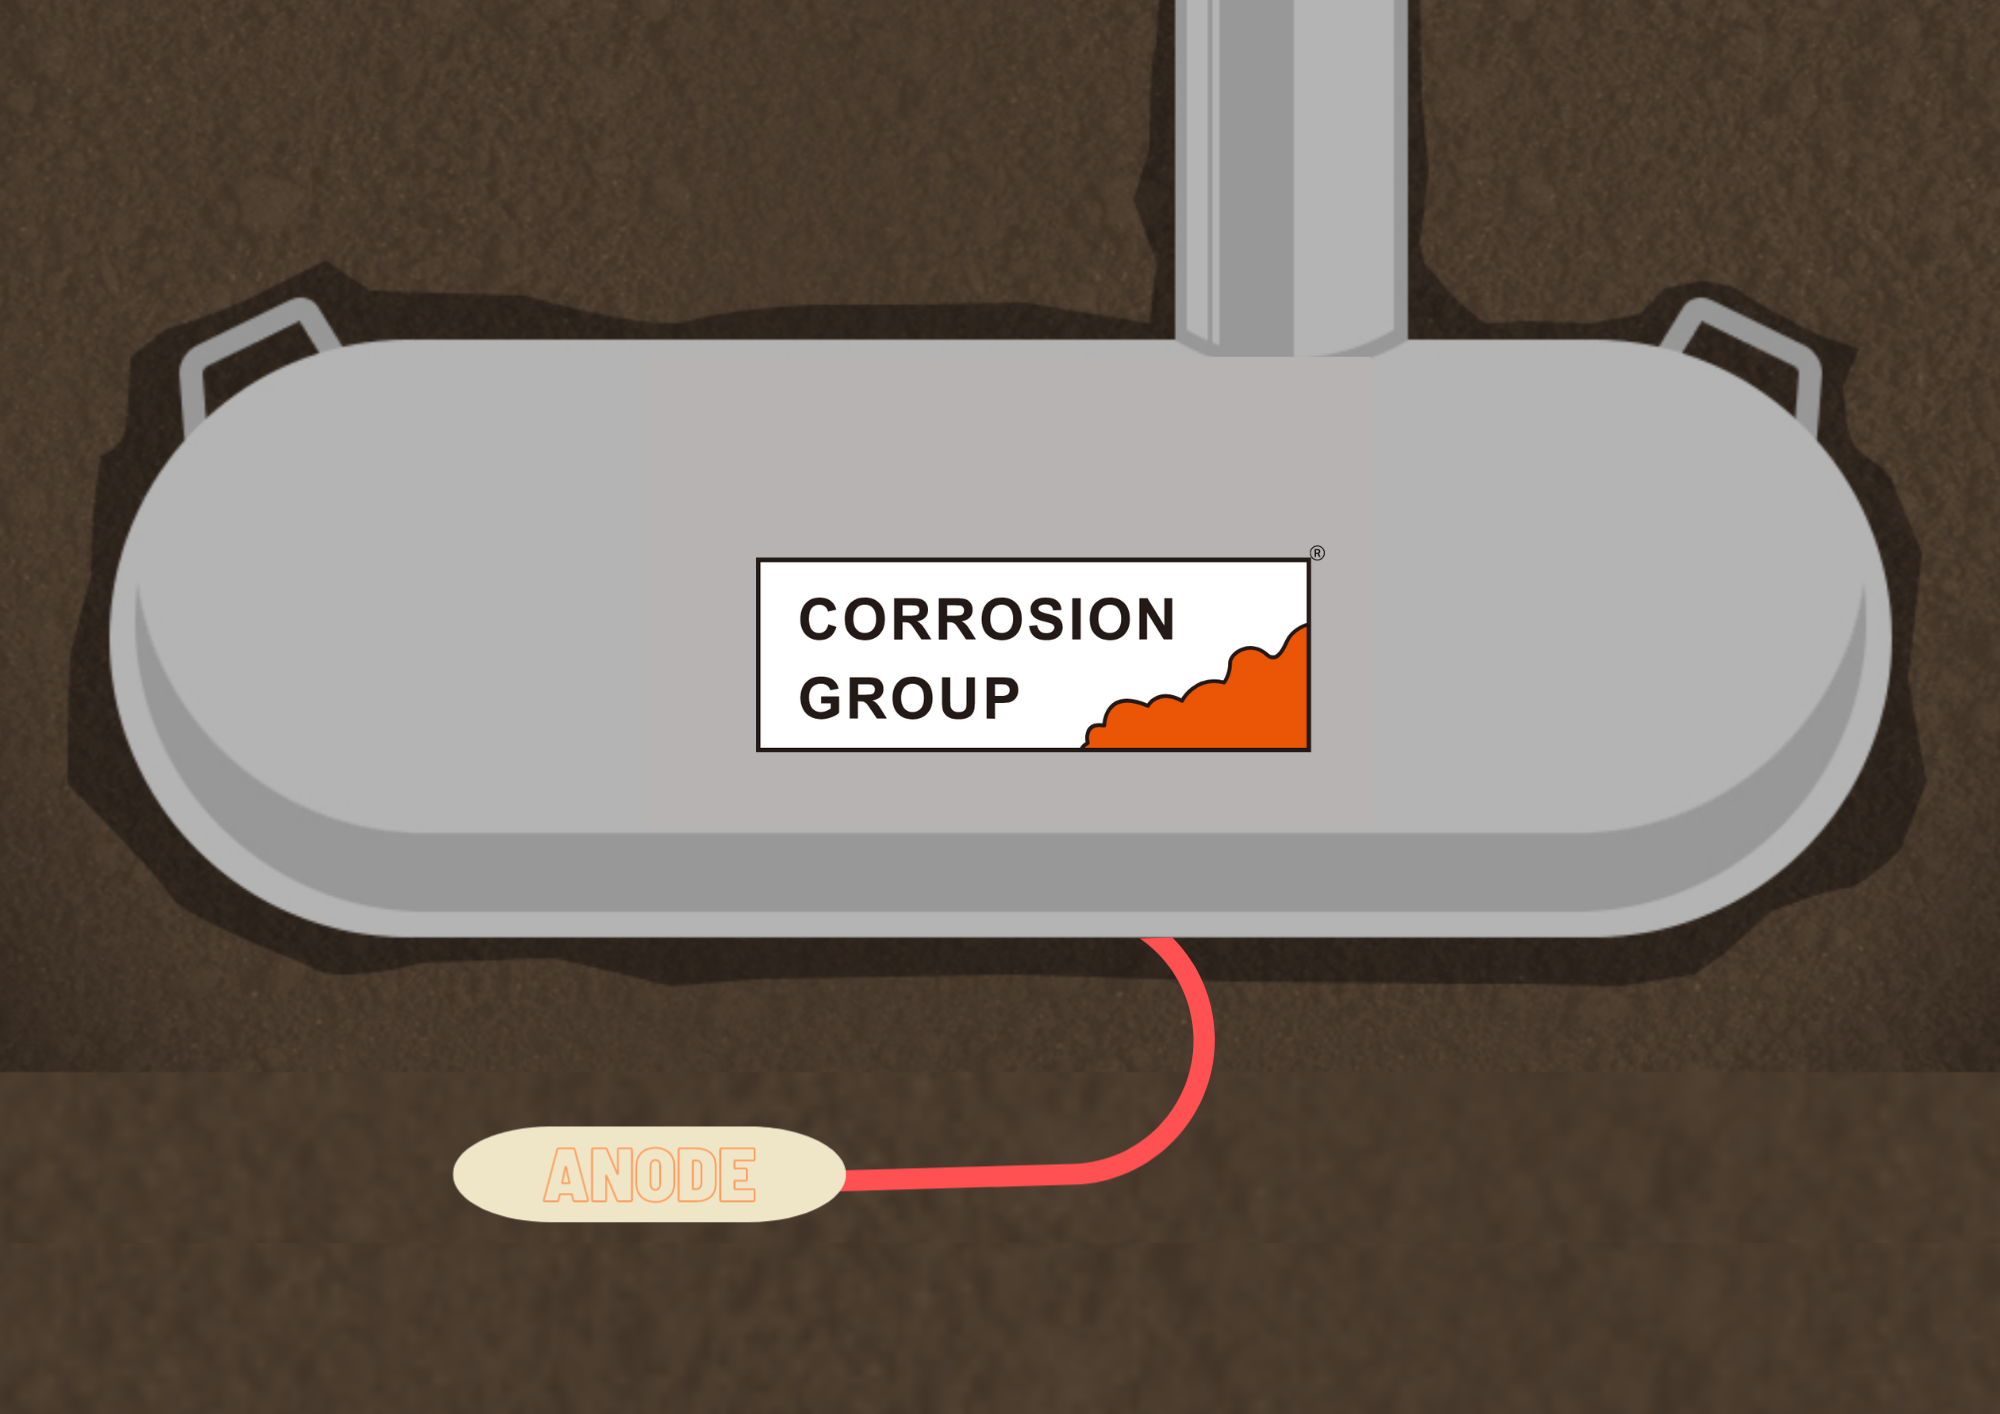 Underground tank with anode connected